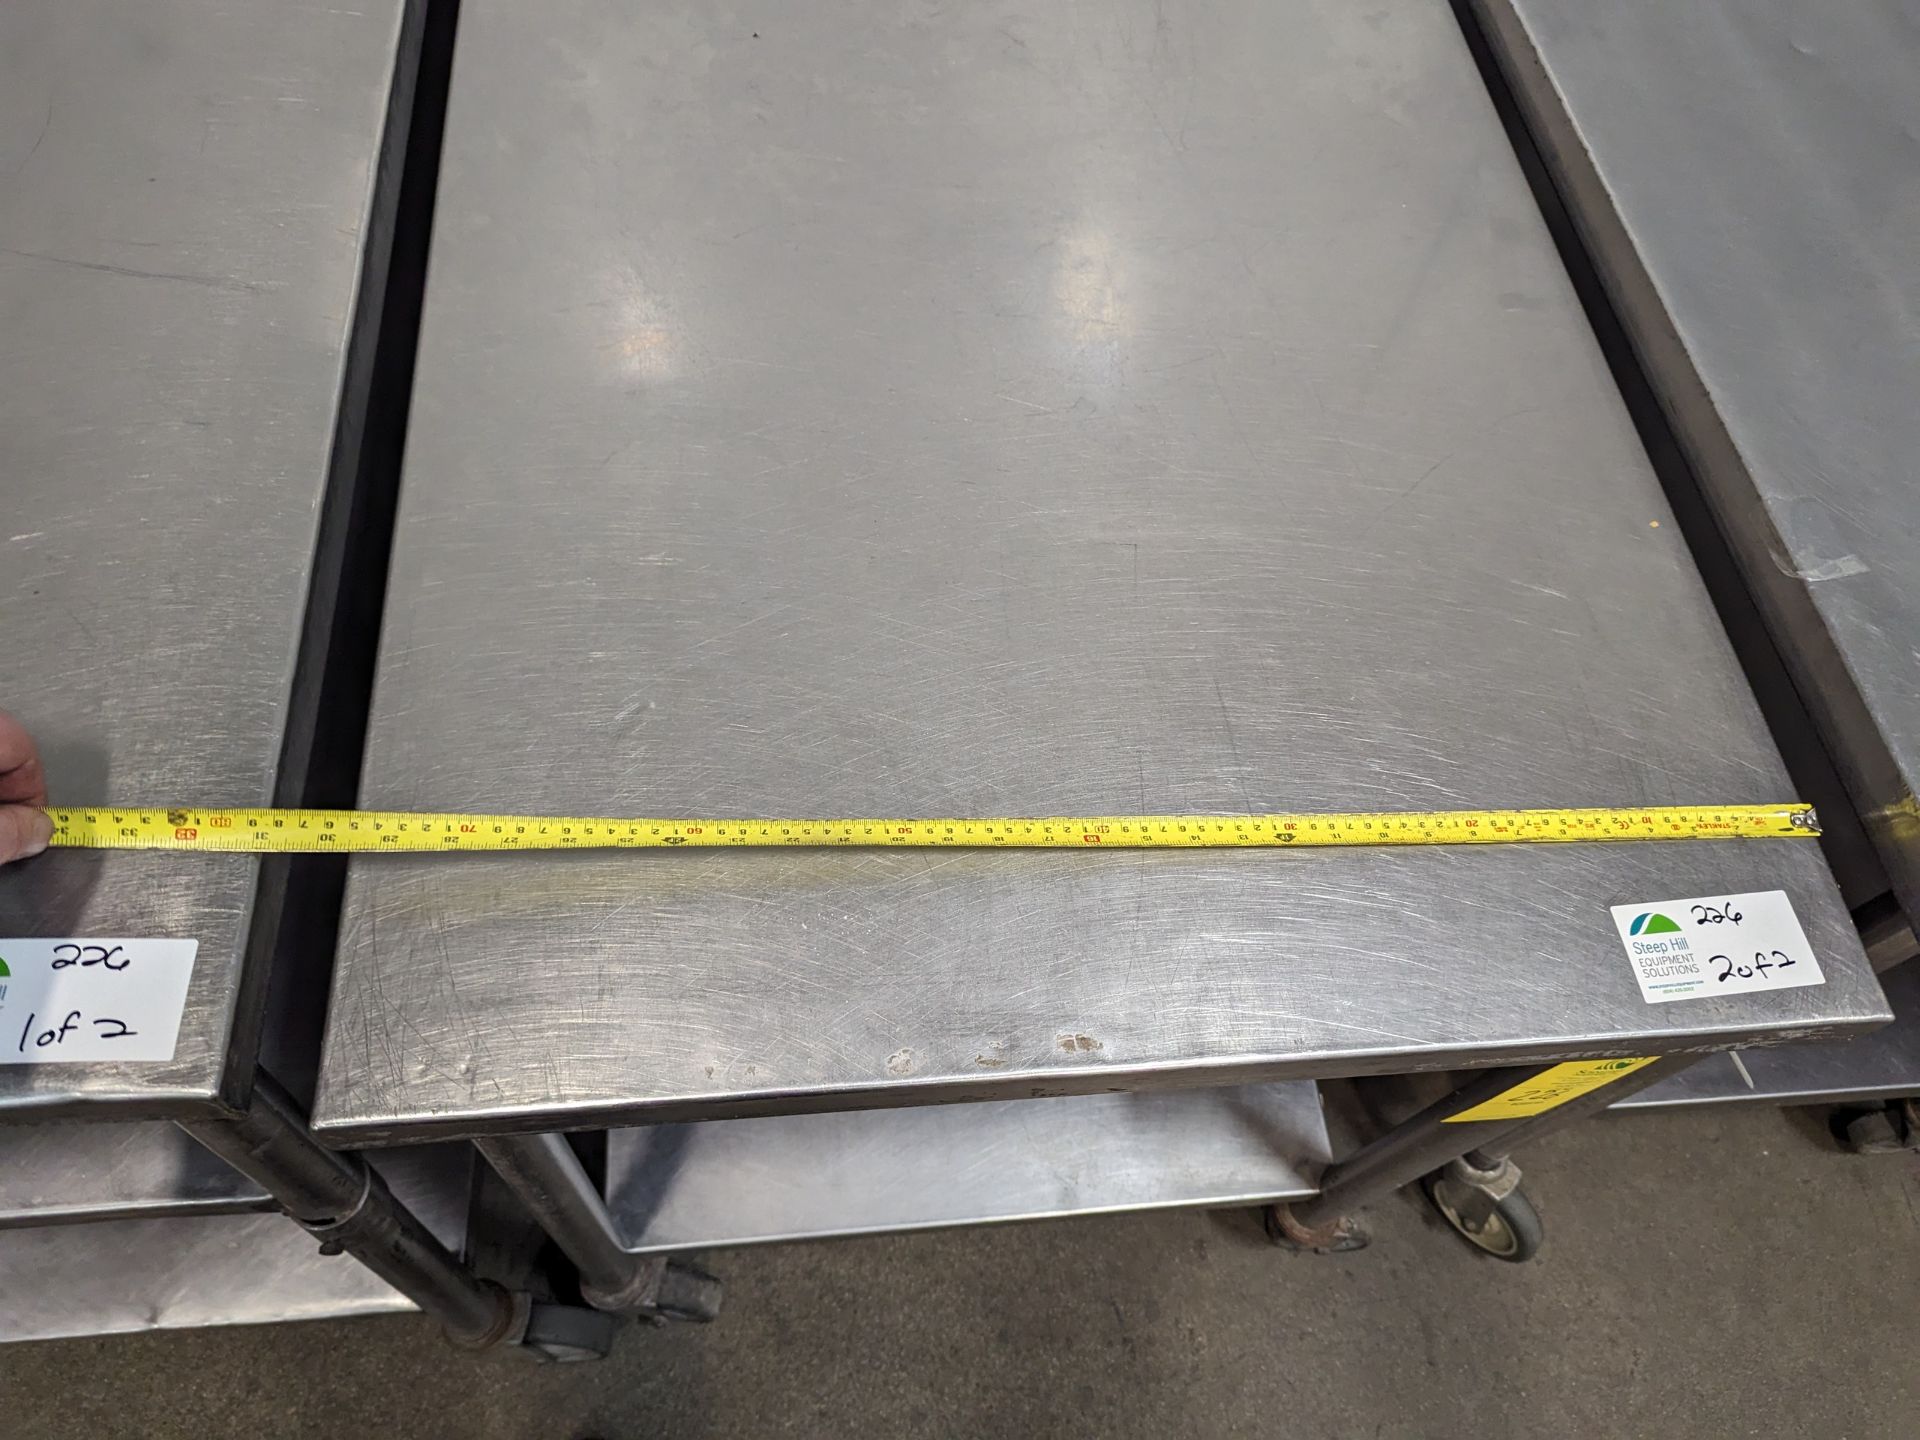 Lot of 2 7ft Long SS Tables, Dimensions LxWxH: 84x30x36 each - Image 5 of 6